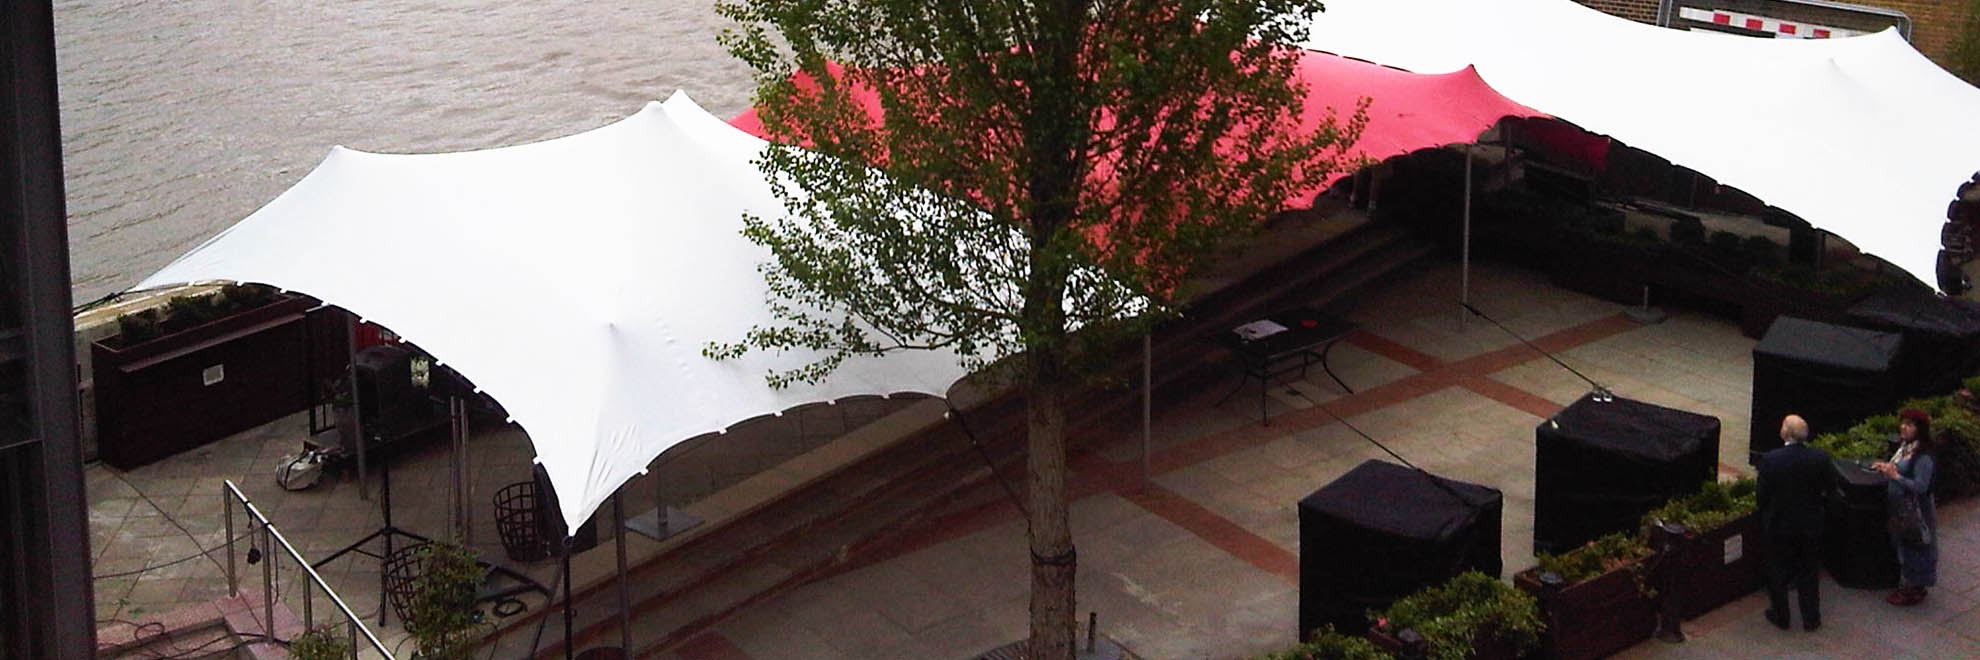 white and red stretch tent along side River thames held down with ballast